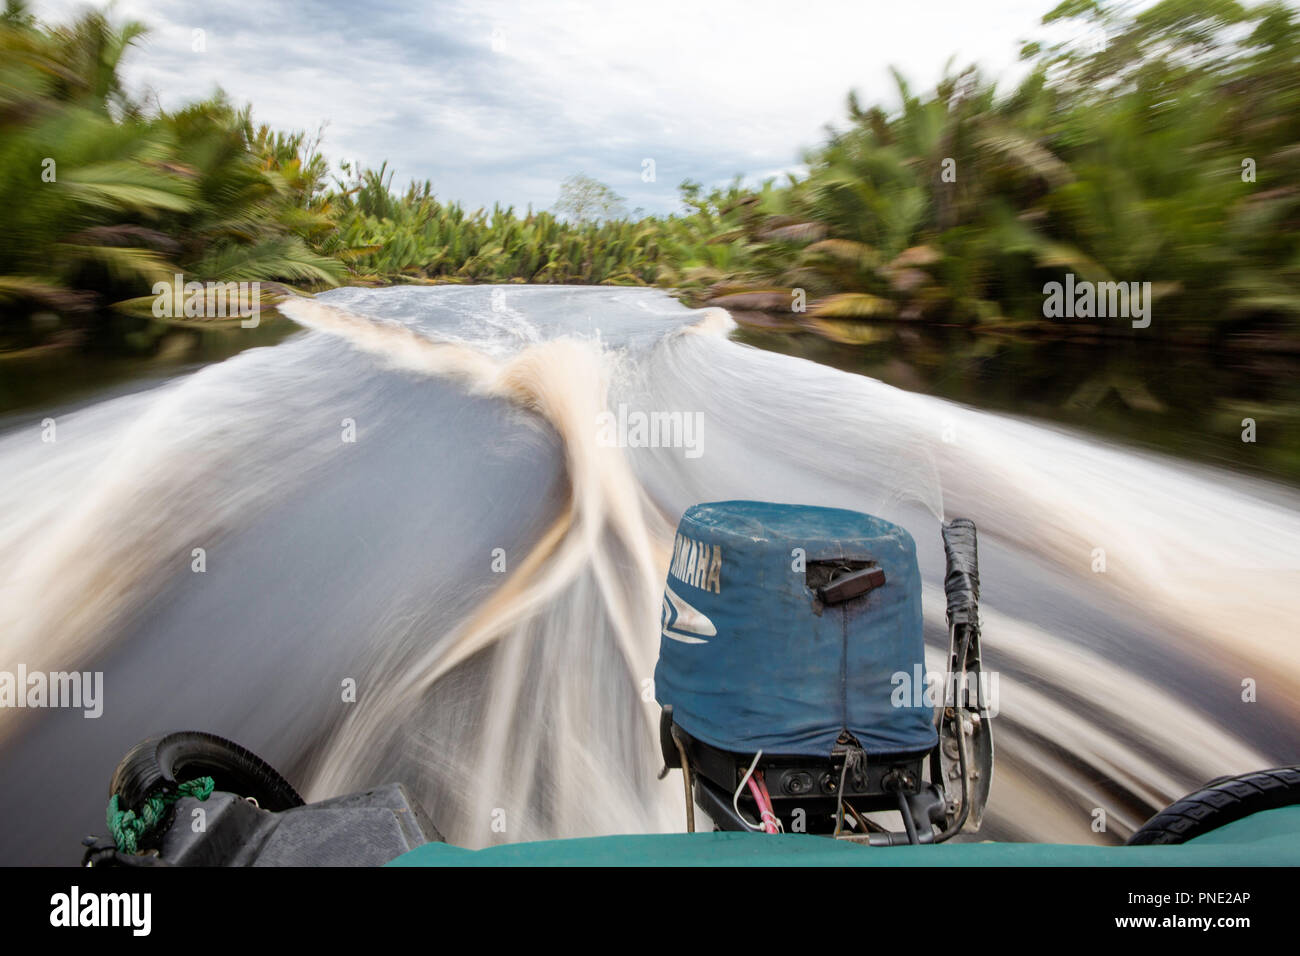 Speed Boat on the Sekonyer River, Tanjung Puting National Park, Borneo, Indonesia. Stock Photo